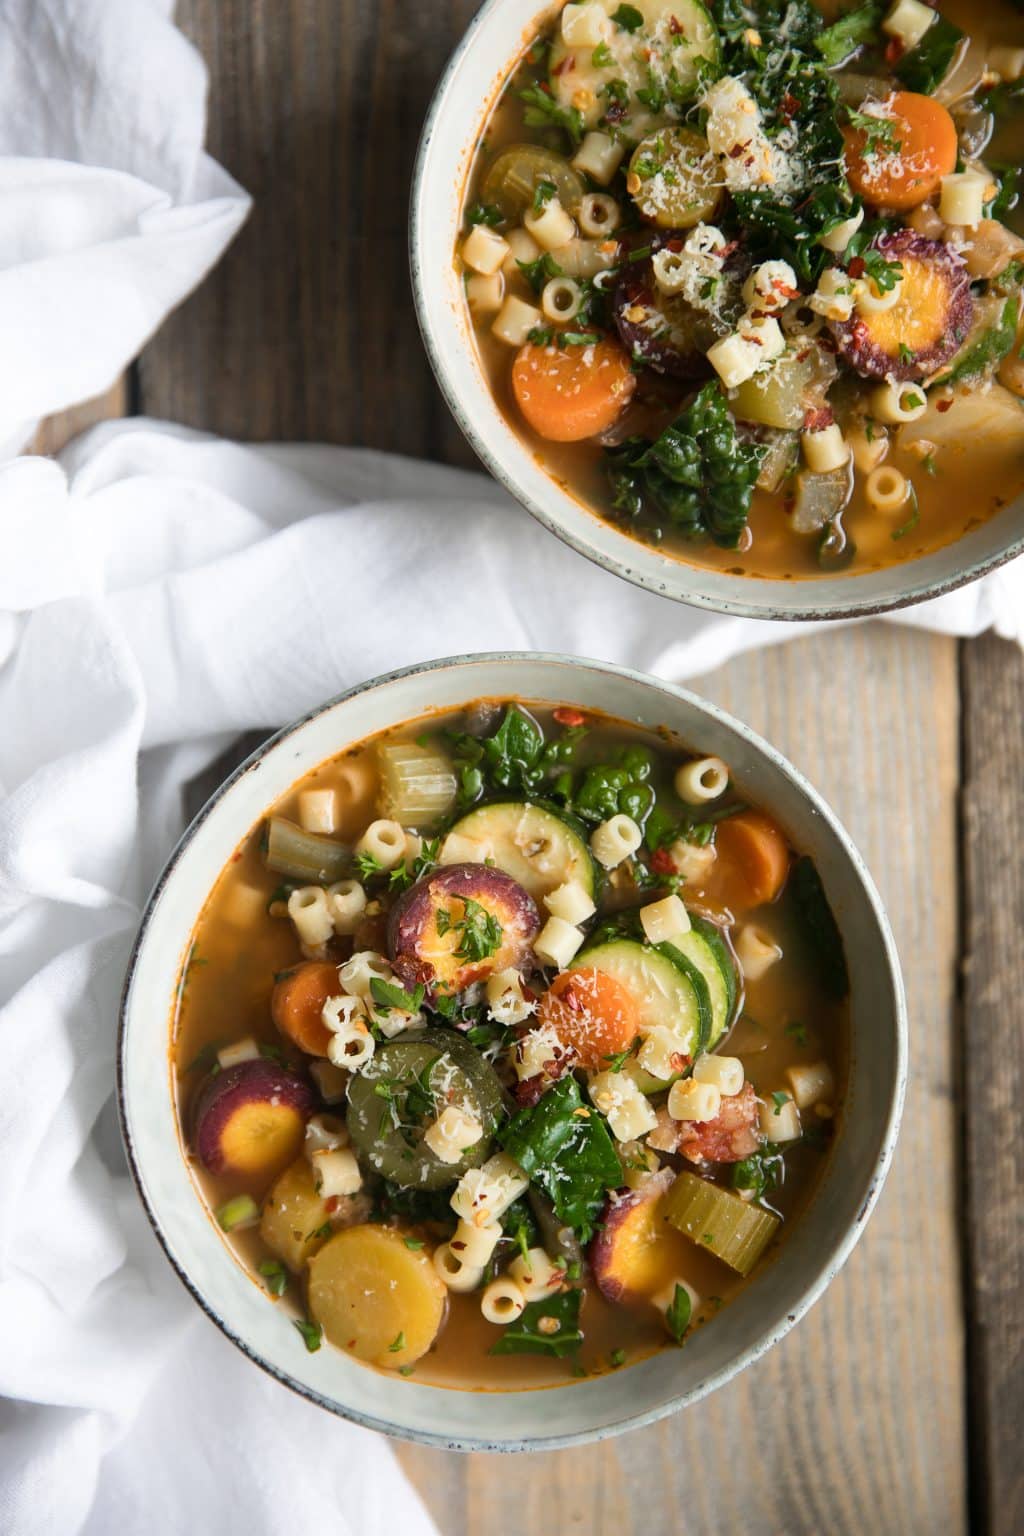 Two bowls filled with Minestrone soup made with mixed seasonal vegetables and pasta noodles.